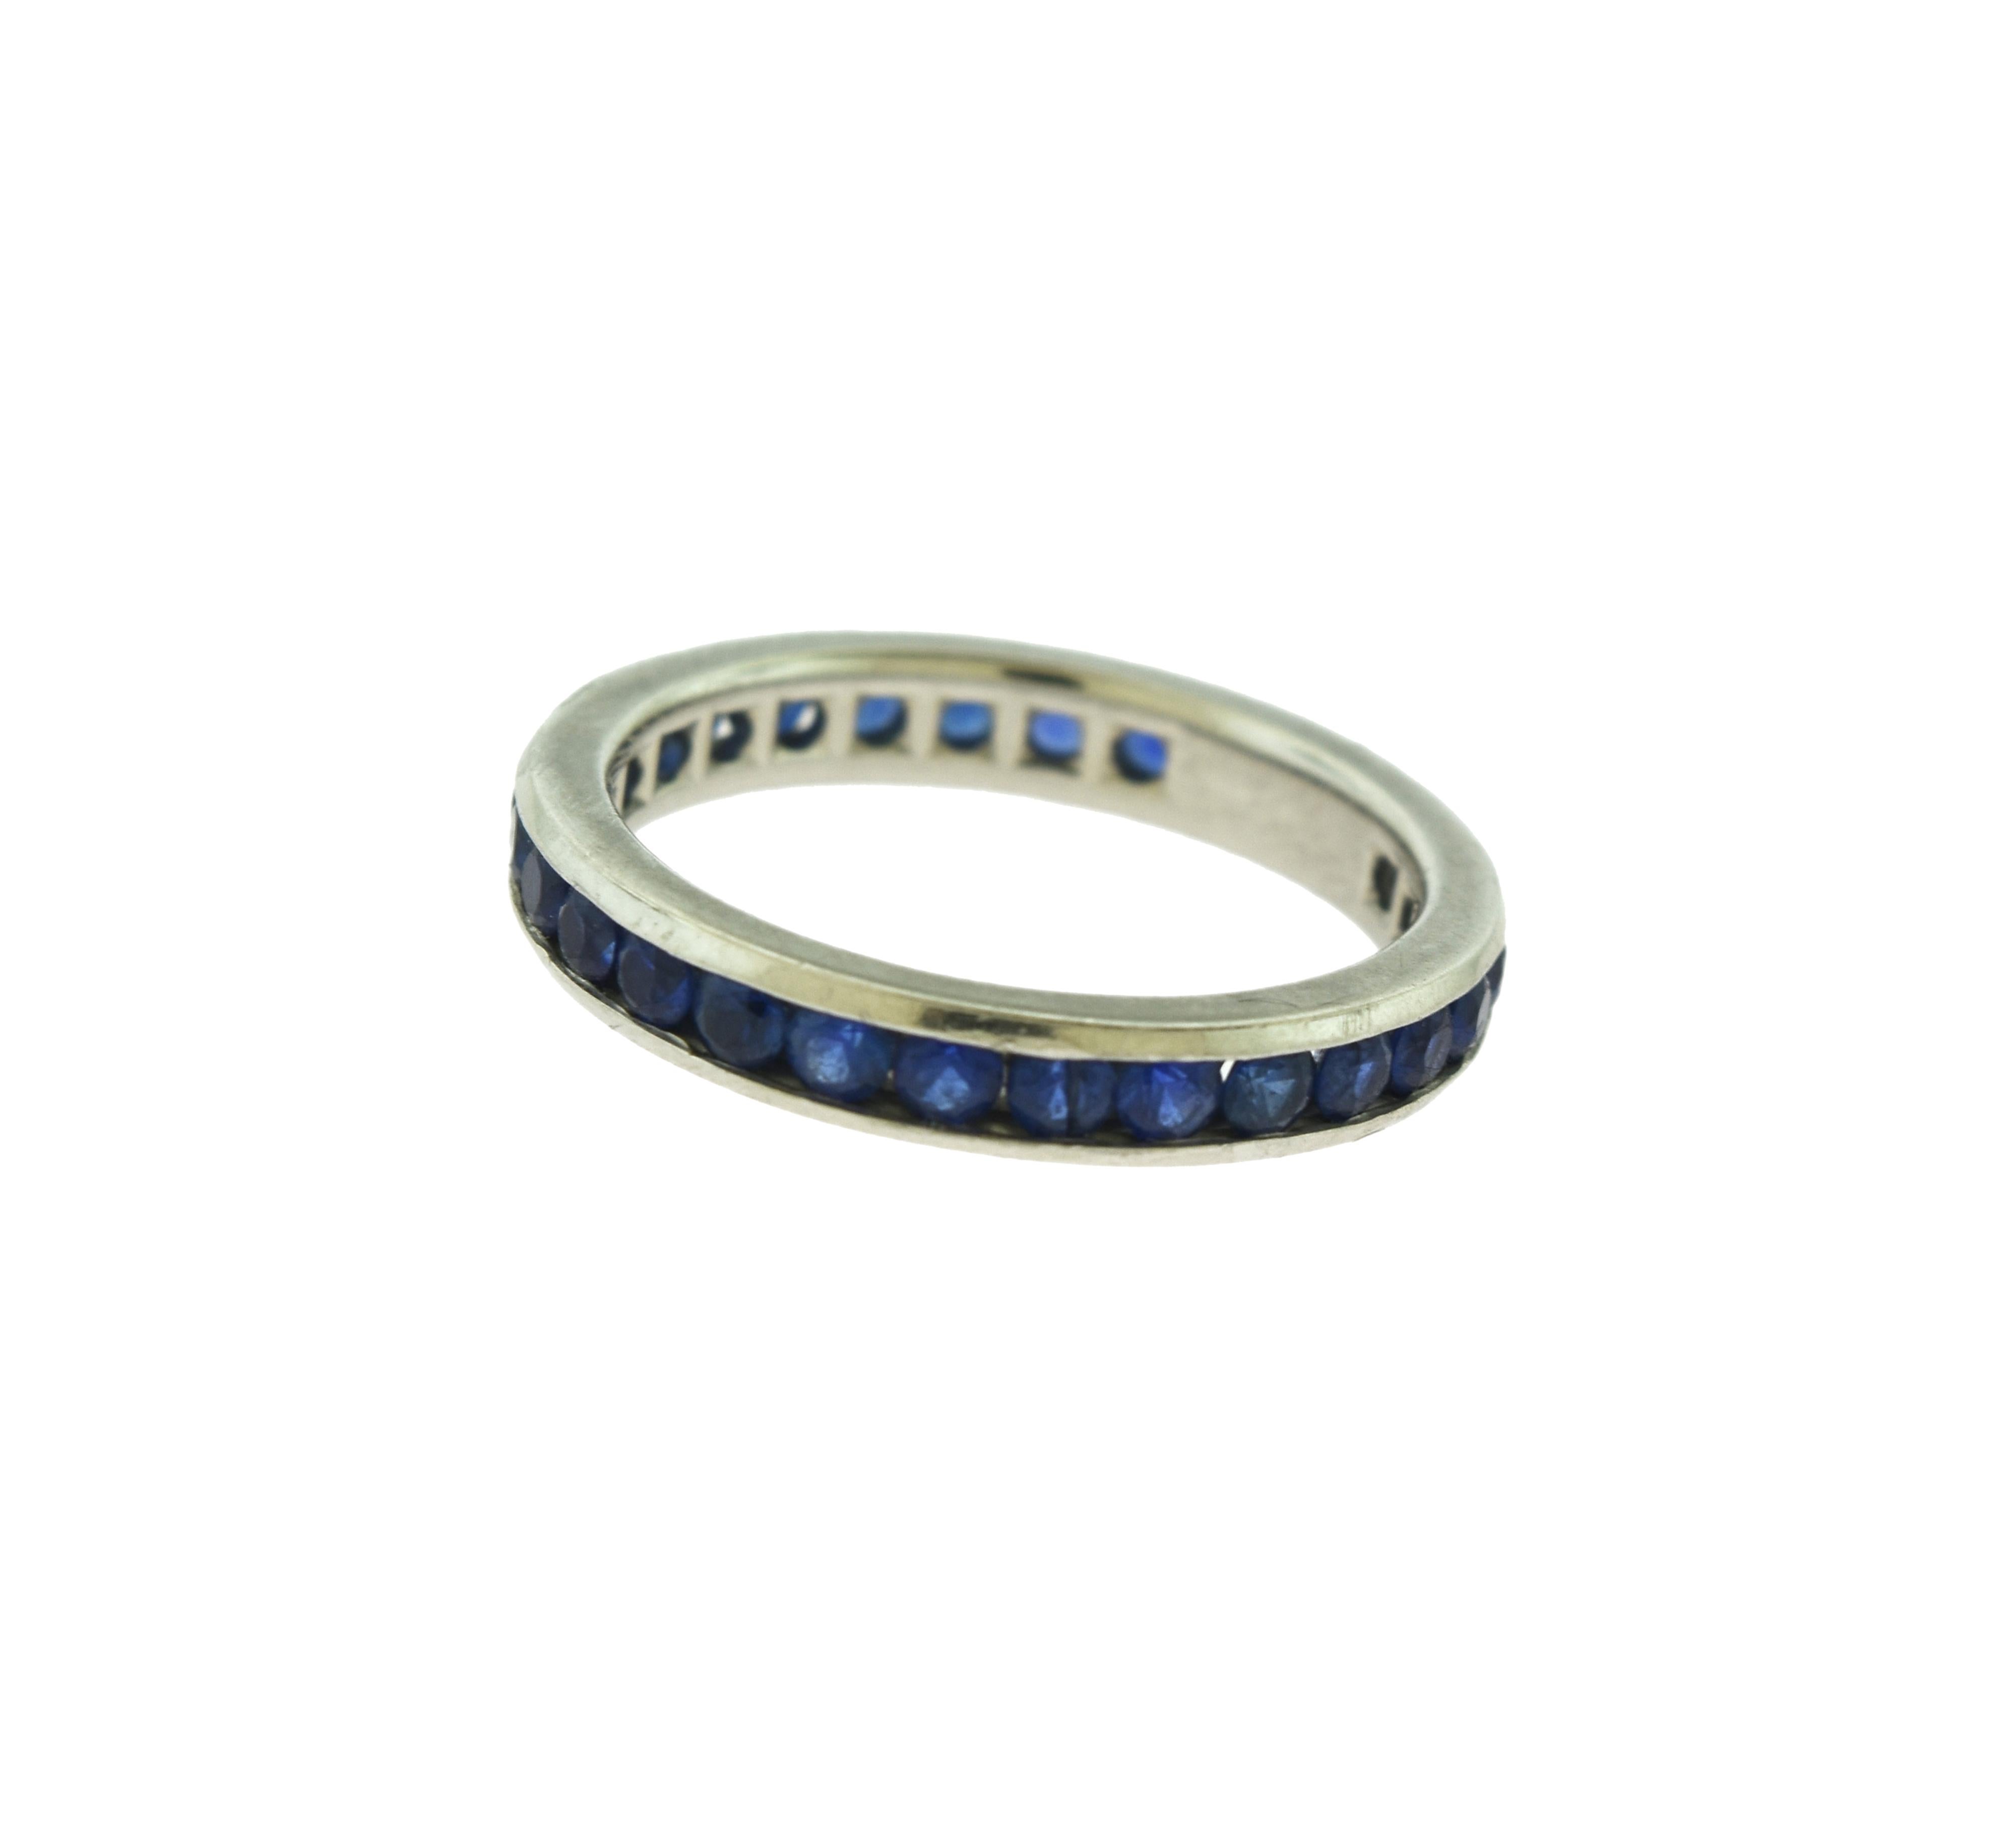 Brilliance Jewels, Miami
Questions? Call Us Anytime!
786,482,8100

Ring Size: 5.5 

Designer: Tiffany & Co.

Style: Eternity Band

Metal: Platinum 

Metal Purity: 950 ​​

Stone: Blue Sapphire

Band Width: 3 mm 

Total Carat Weight : Approx. 1.35